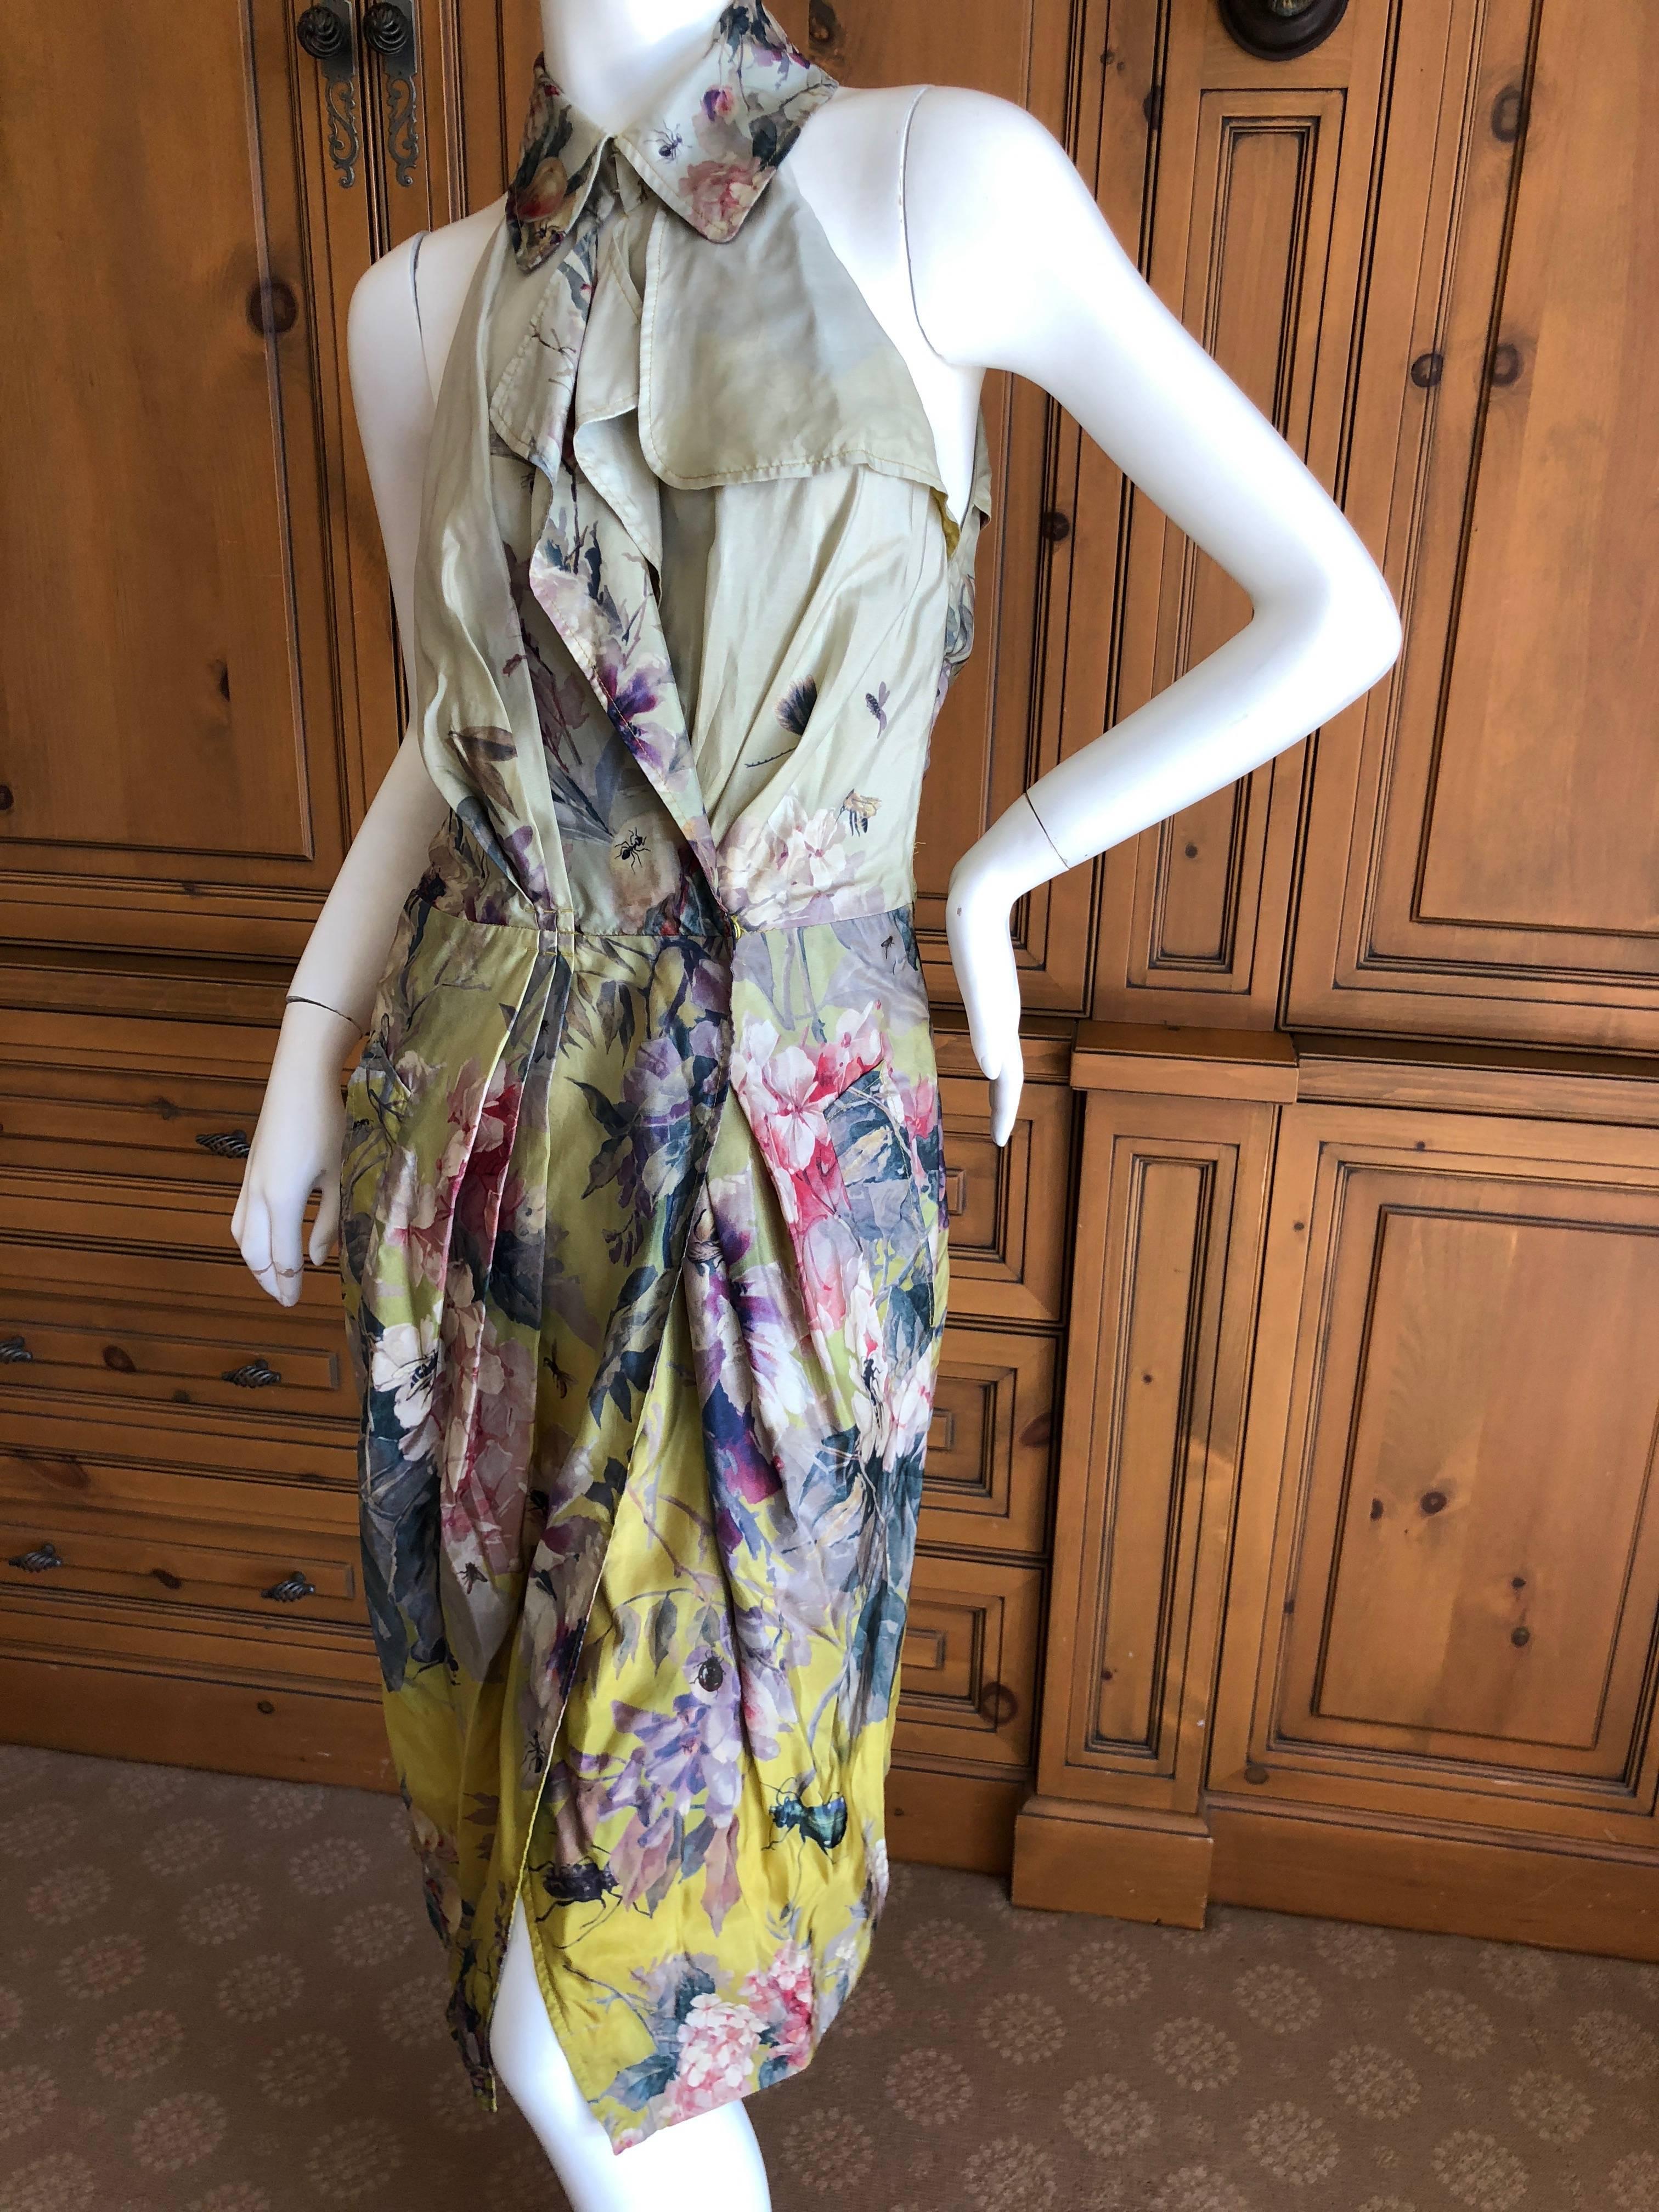 Jean Paul Gaultier Vintage Silk Halter Dress with Insects and Flowers.
So much sweeter than the photos show.
Size 40
Bust 40